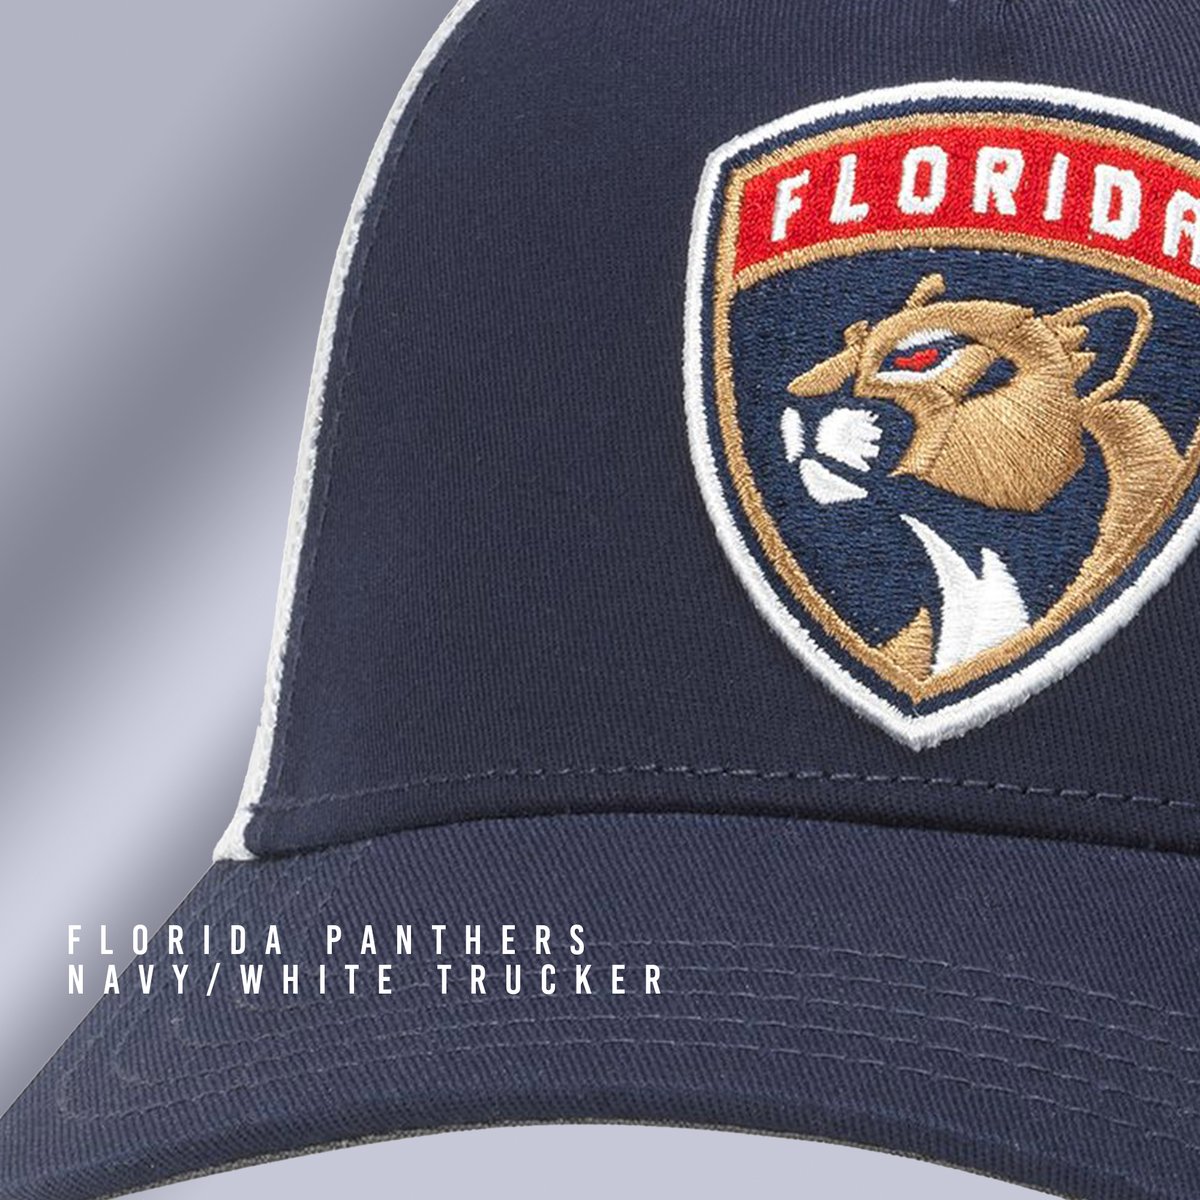 Stroll the streets in style. Panthers style. 🏒🥅

🛒buff.ly/3q7KZSp

#FloridaPanthers|#Panthers|#FloridaPanthersHat|#PanthersNation|#PanthersHockey|#PanthersFans|#FLPanthers|#PanthersPride|#TimeToHunt|#NHL|#HockeyTwitter